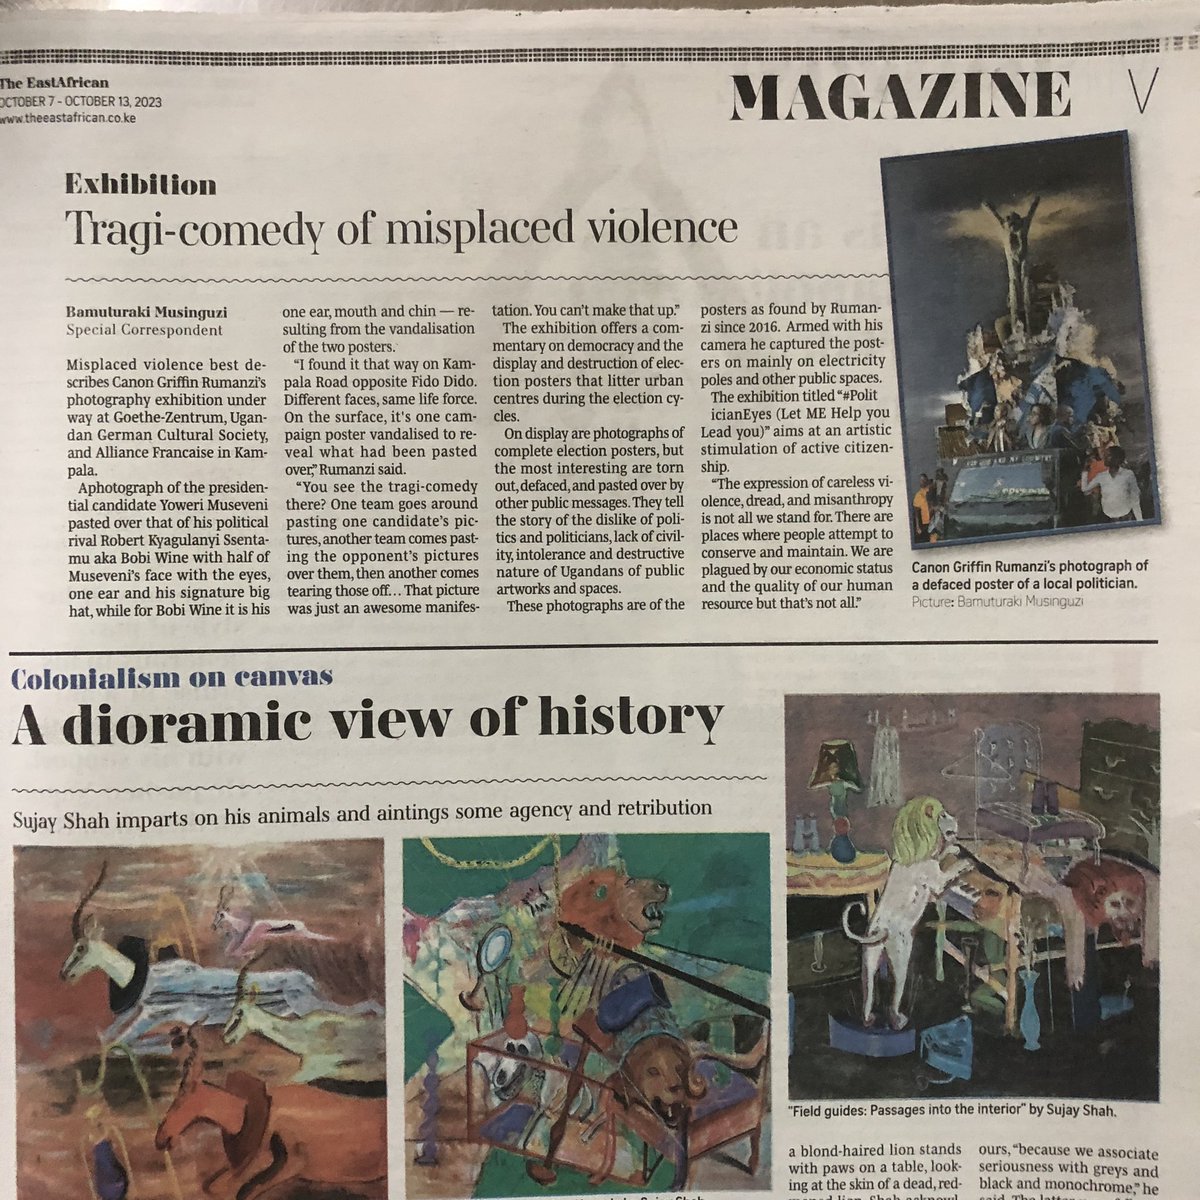 It’s @musibamu1 for @The_EastAfrican. Arts correspondence introducing my exhibition at @GZ_Kampala / @AFKampala. - 21OCT2023. Online: theeastafrican.co.ke/tea/magazine/t… On the same page is the awesome art by Sujay Shah who just completed his residency at @32degreeseast . Viva!